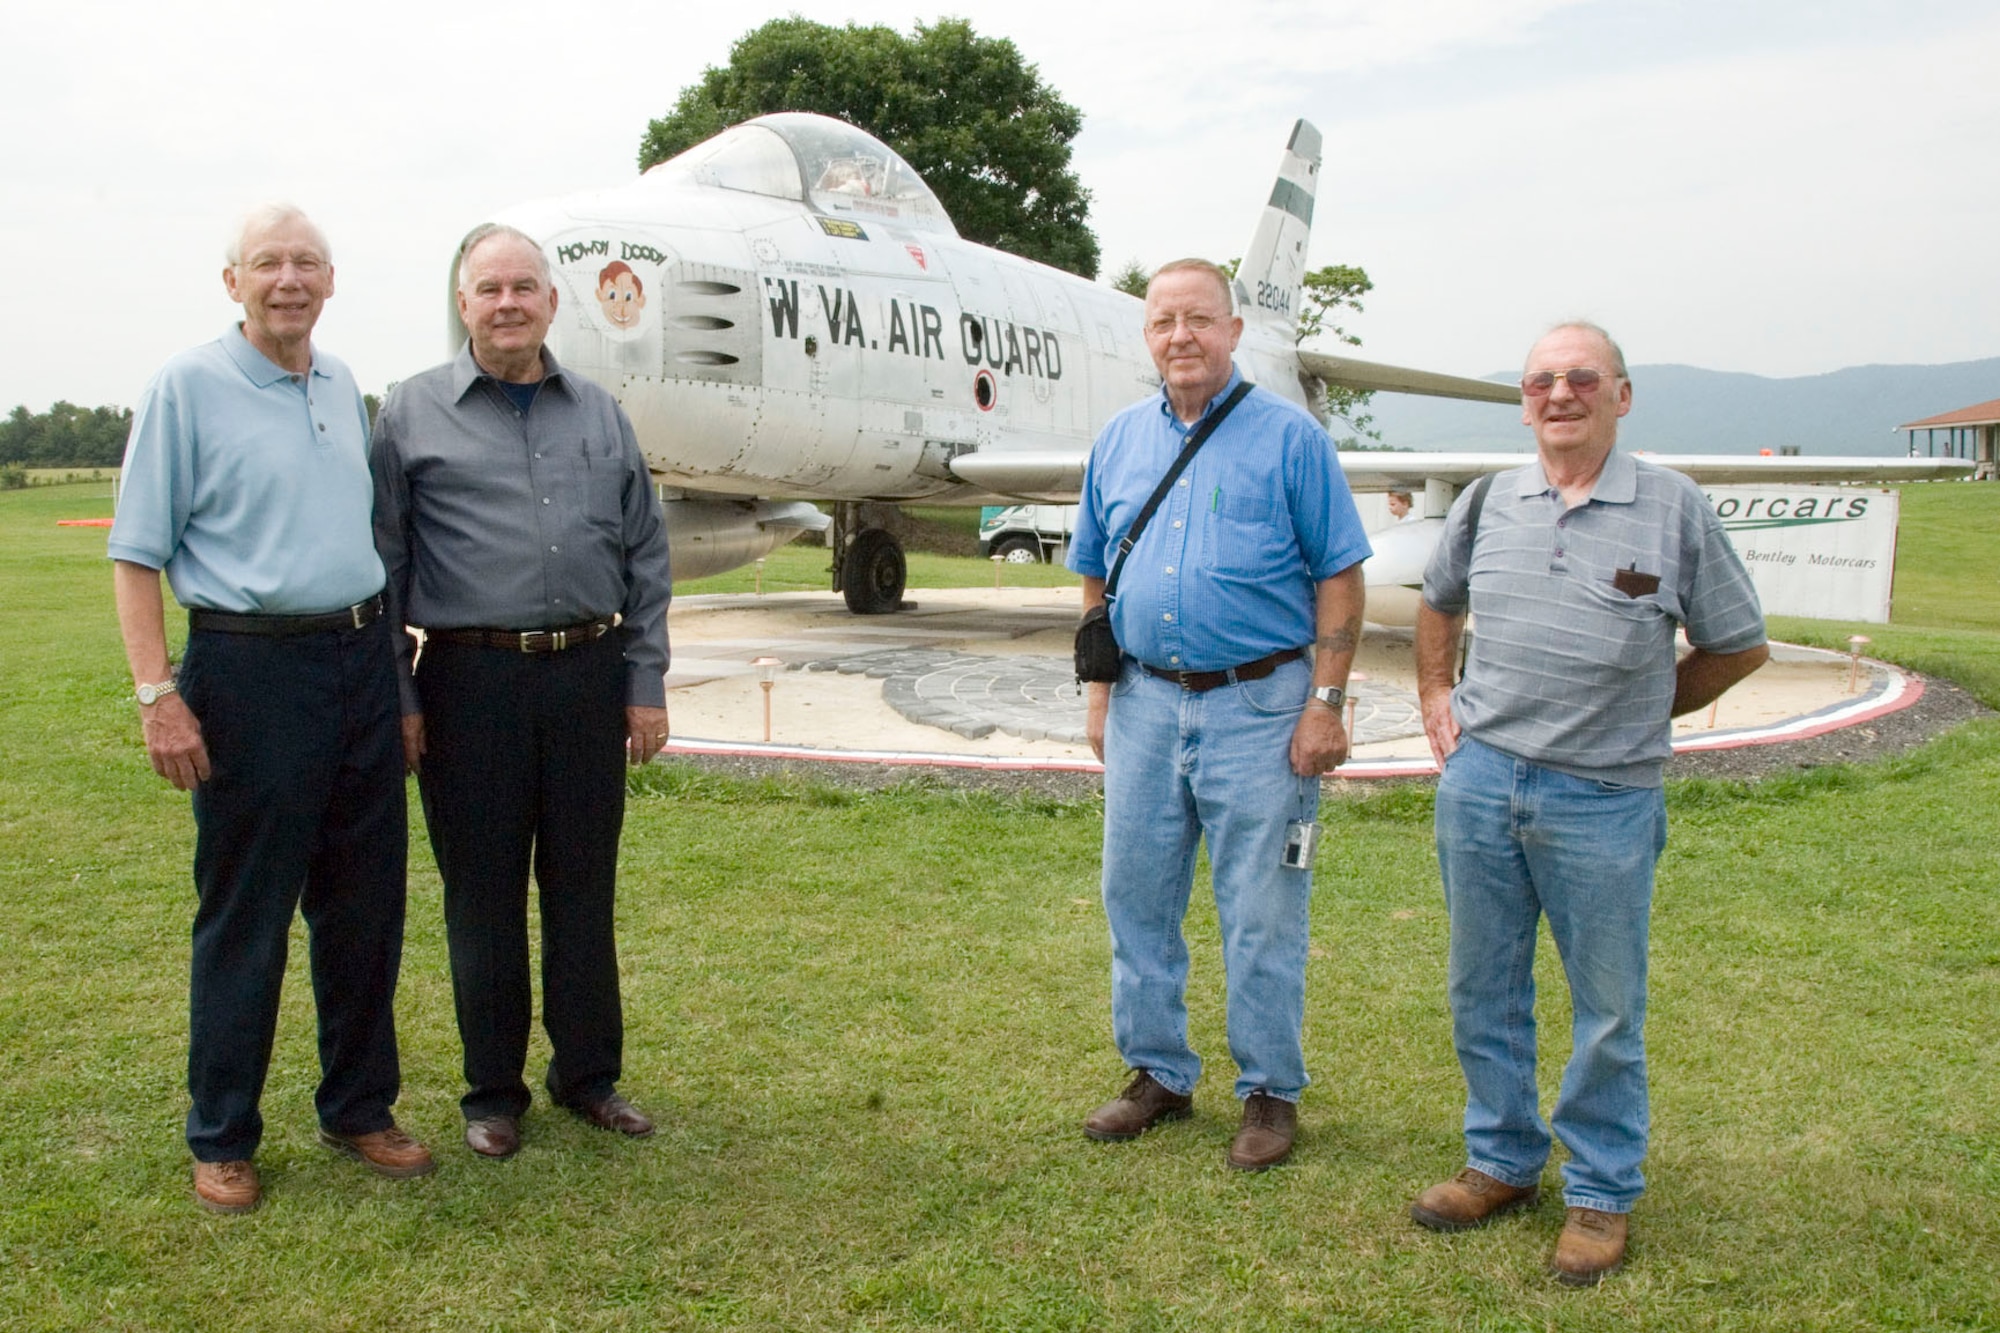 Al Ogden, Cecil Artrip, Donald Leight, and Kenneth Evans stand in front of a recently restored F-86H Sabre Jet before a restoration ceremony at the Front Royal Airport in Warren County, Va. Ogden, a retired major from the 167th Airlift Wing, piloted the aircraft while it was assigned to the unit. Artrip, also retired from the 167th Airlift Wing, was the jet's crew chief. Leight and Evans are also retired crew chiefs from the 167th Airlift Wing. Artrip, Leight, and Evans are credited with the restoration of the aircraft which is now on display at the entrance to the Front Royal Airport.